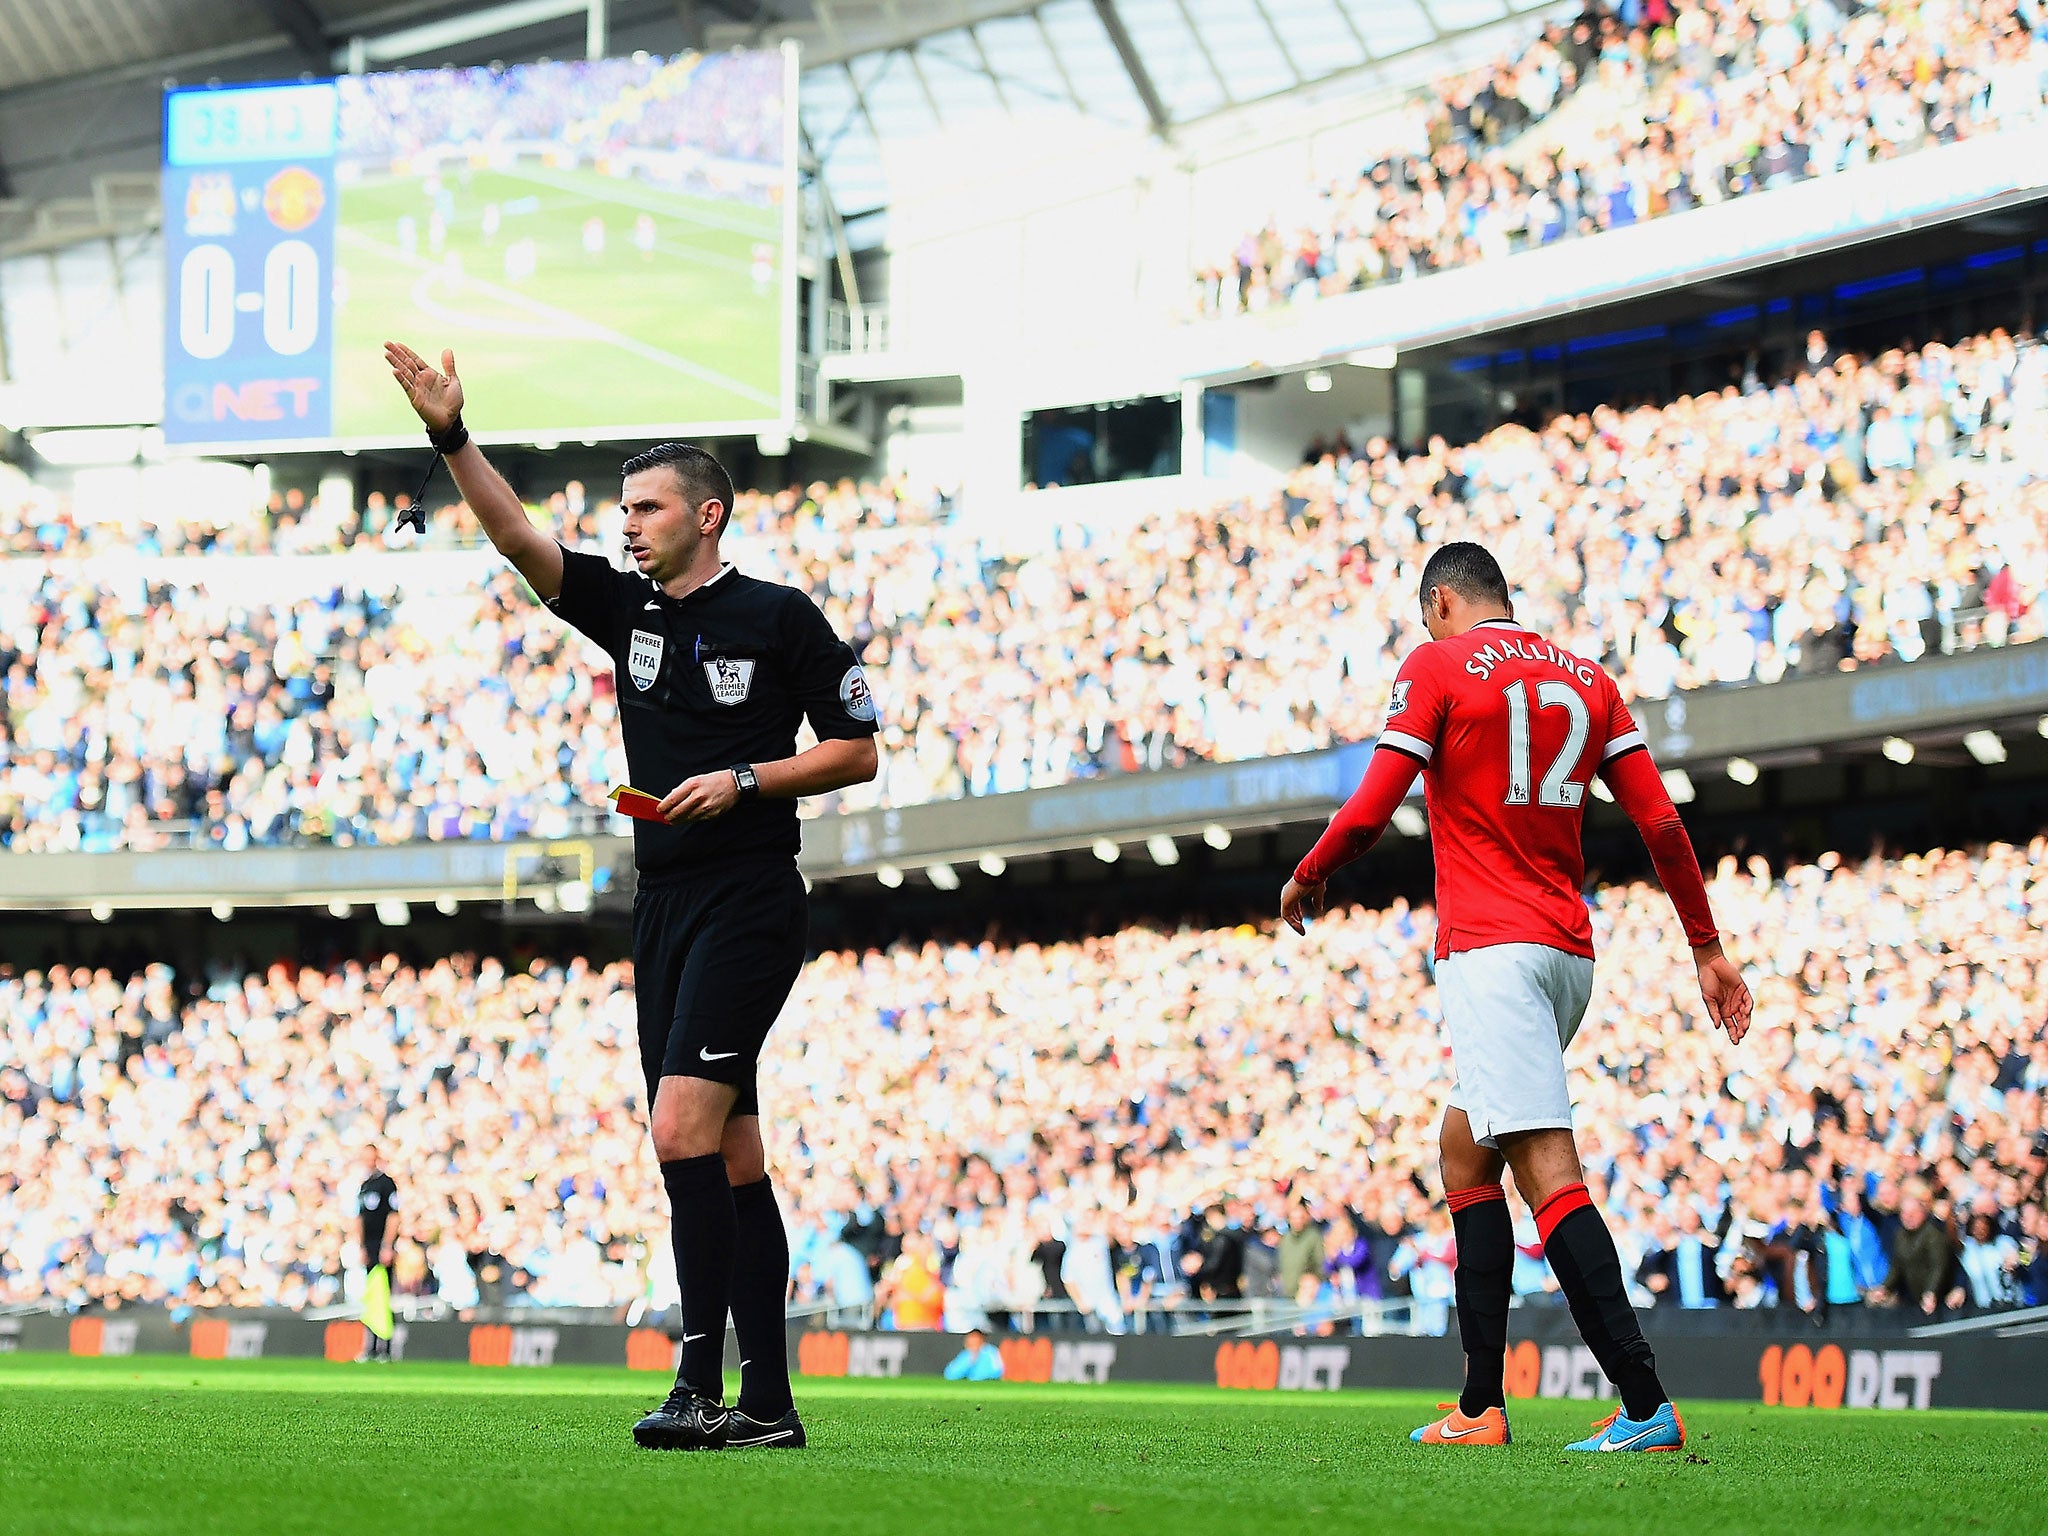 Chris Smalling is given a red card during Manchester United's 1-0 defeat to Manchester City